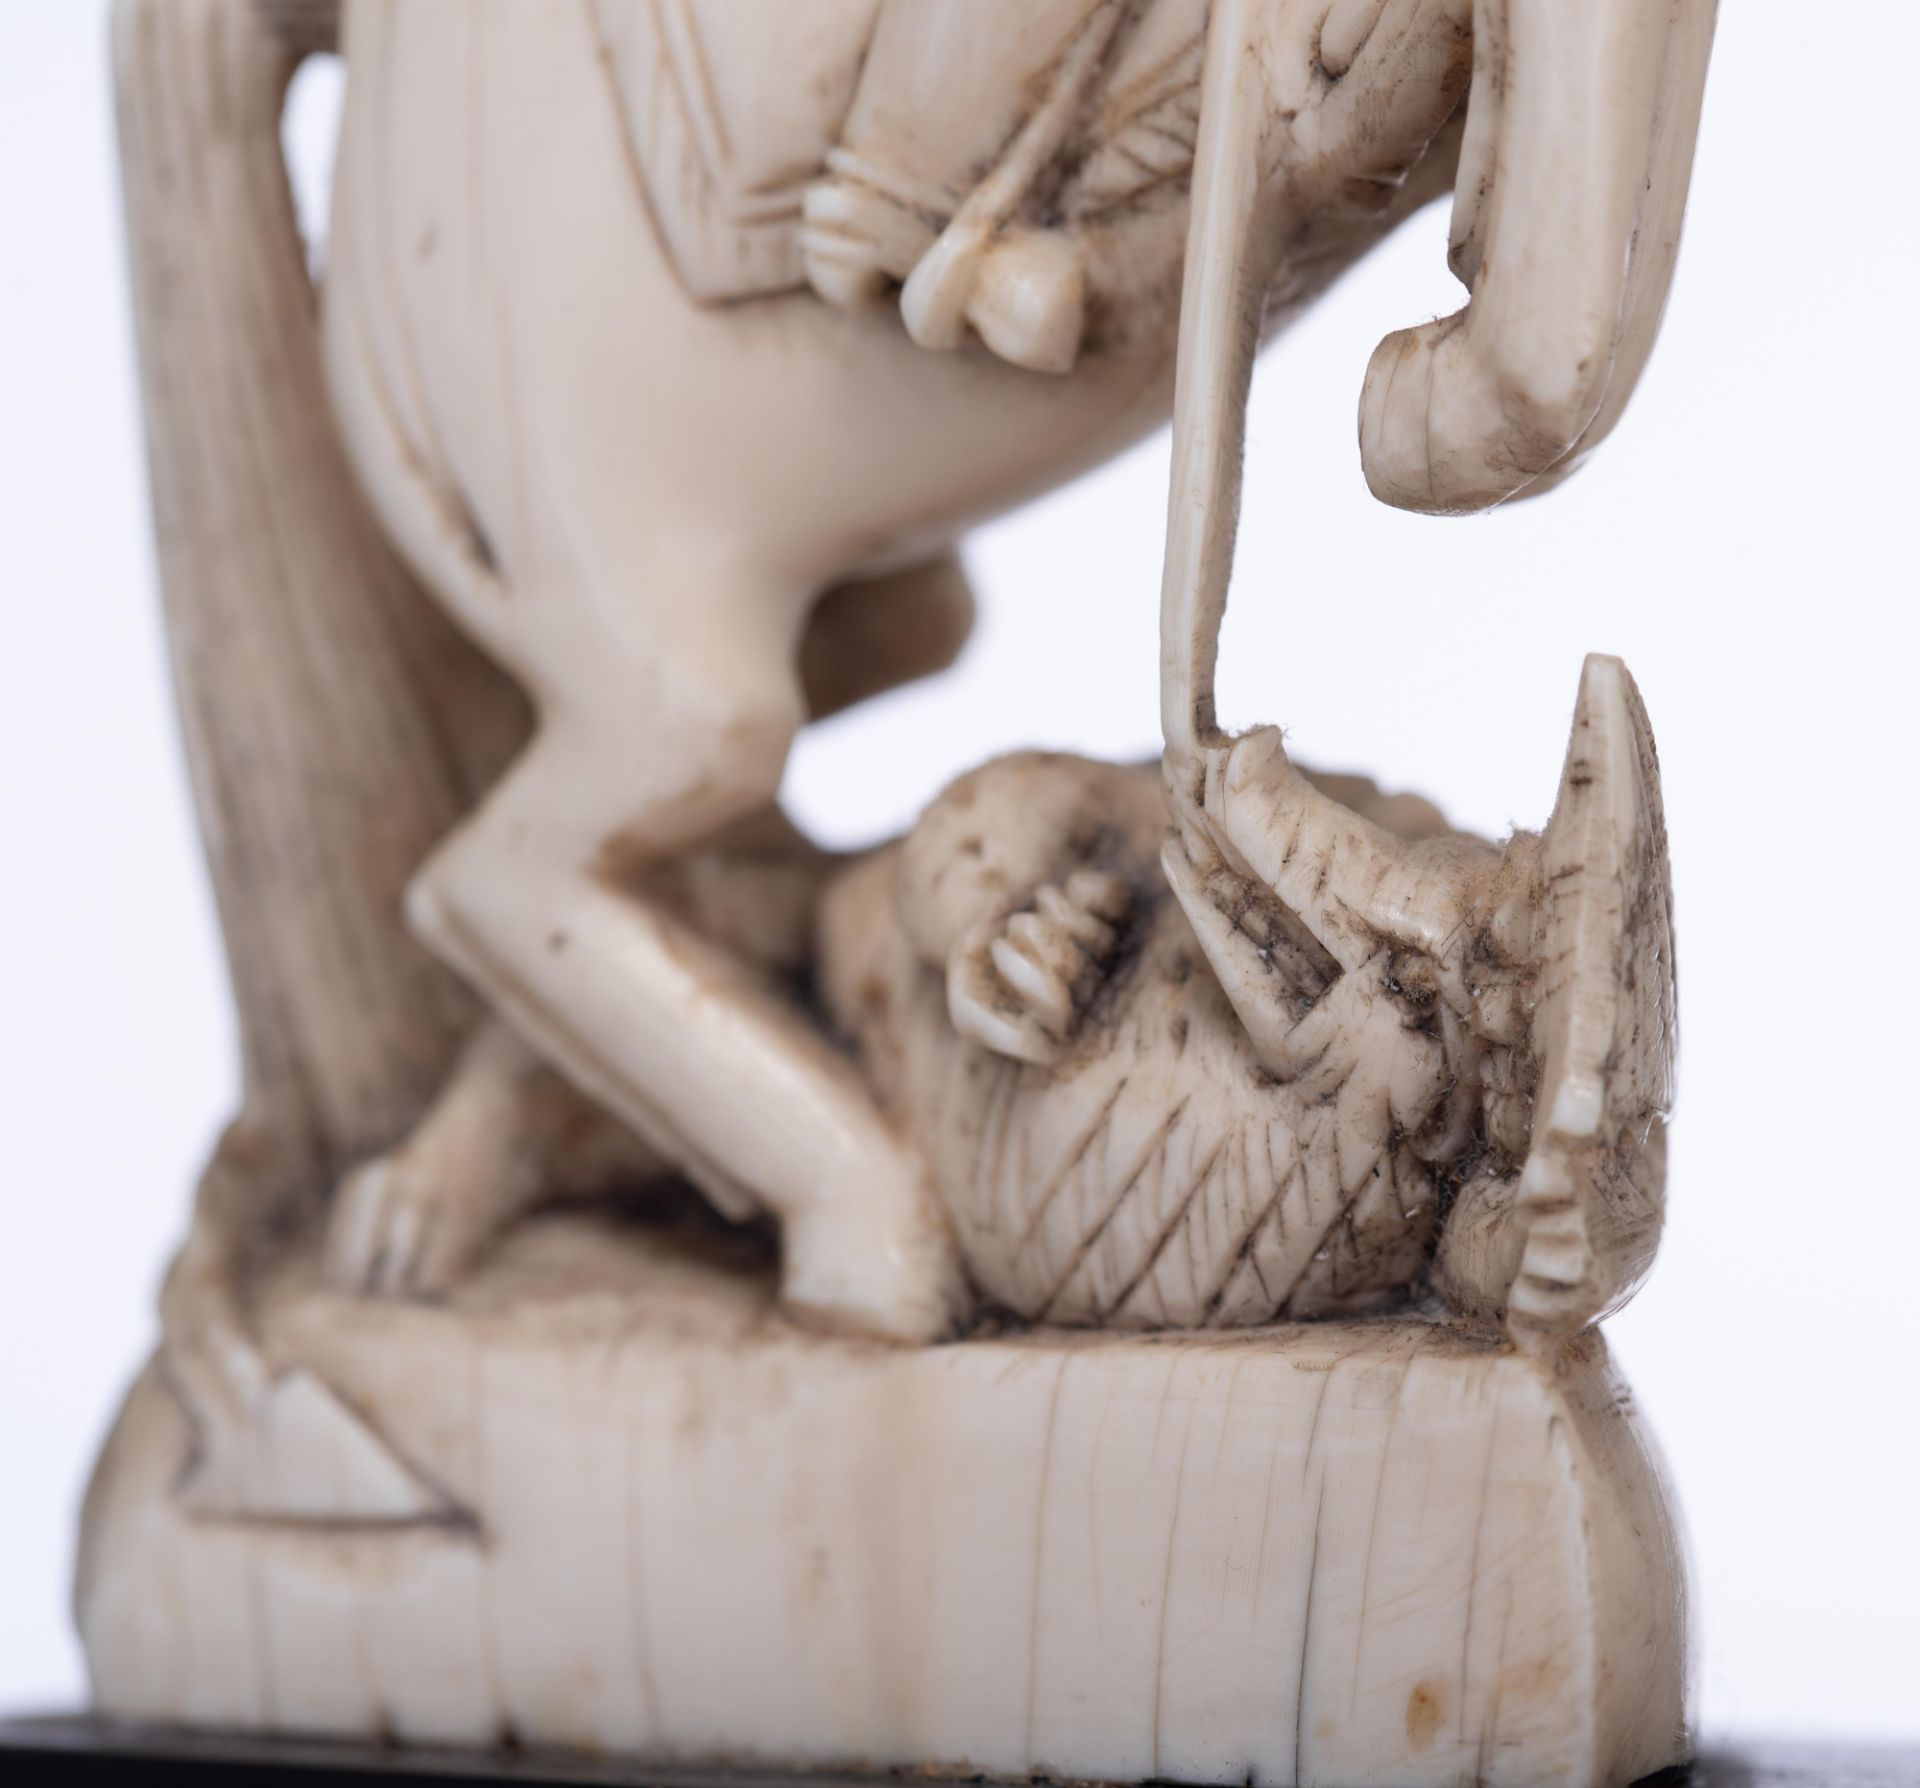 Four 19thC small Dieppe or Paris ivory figures, three on a wooden base, H 7,7 - 16,5 cm - Image 37 of 51